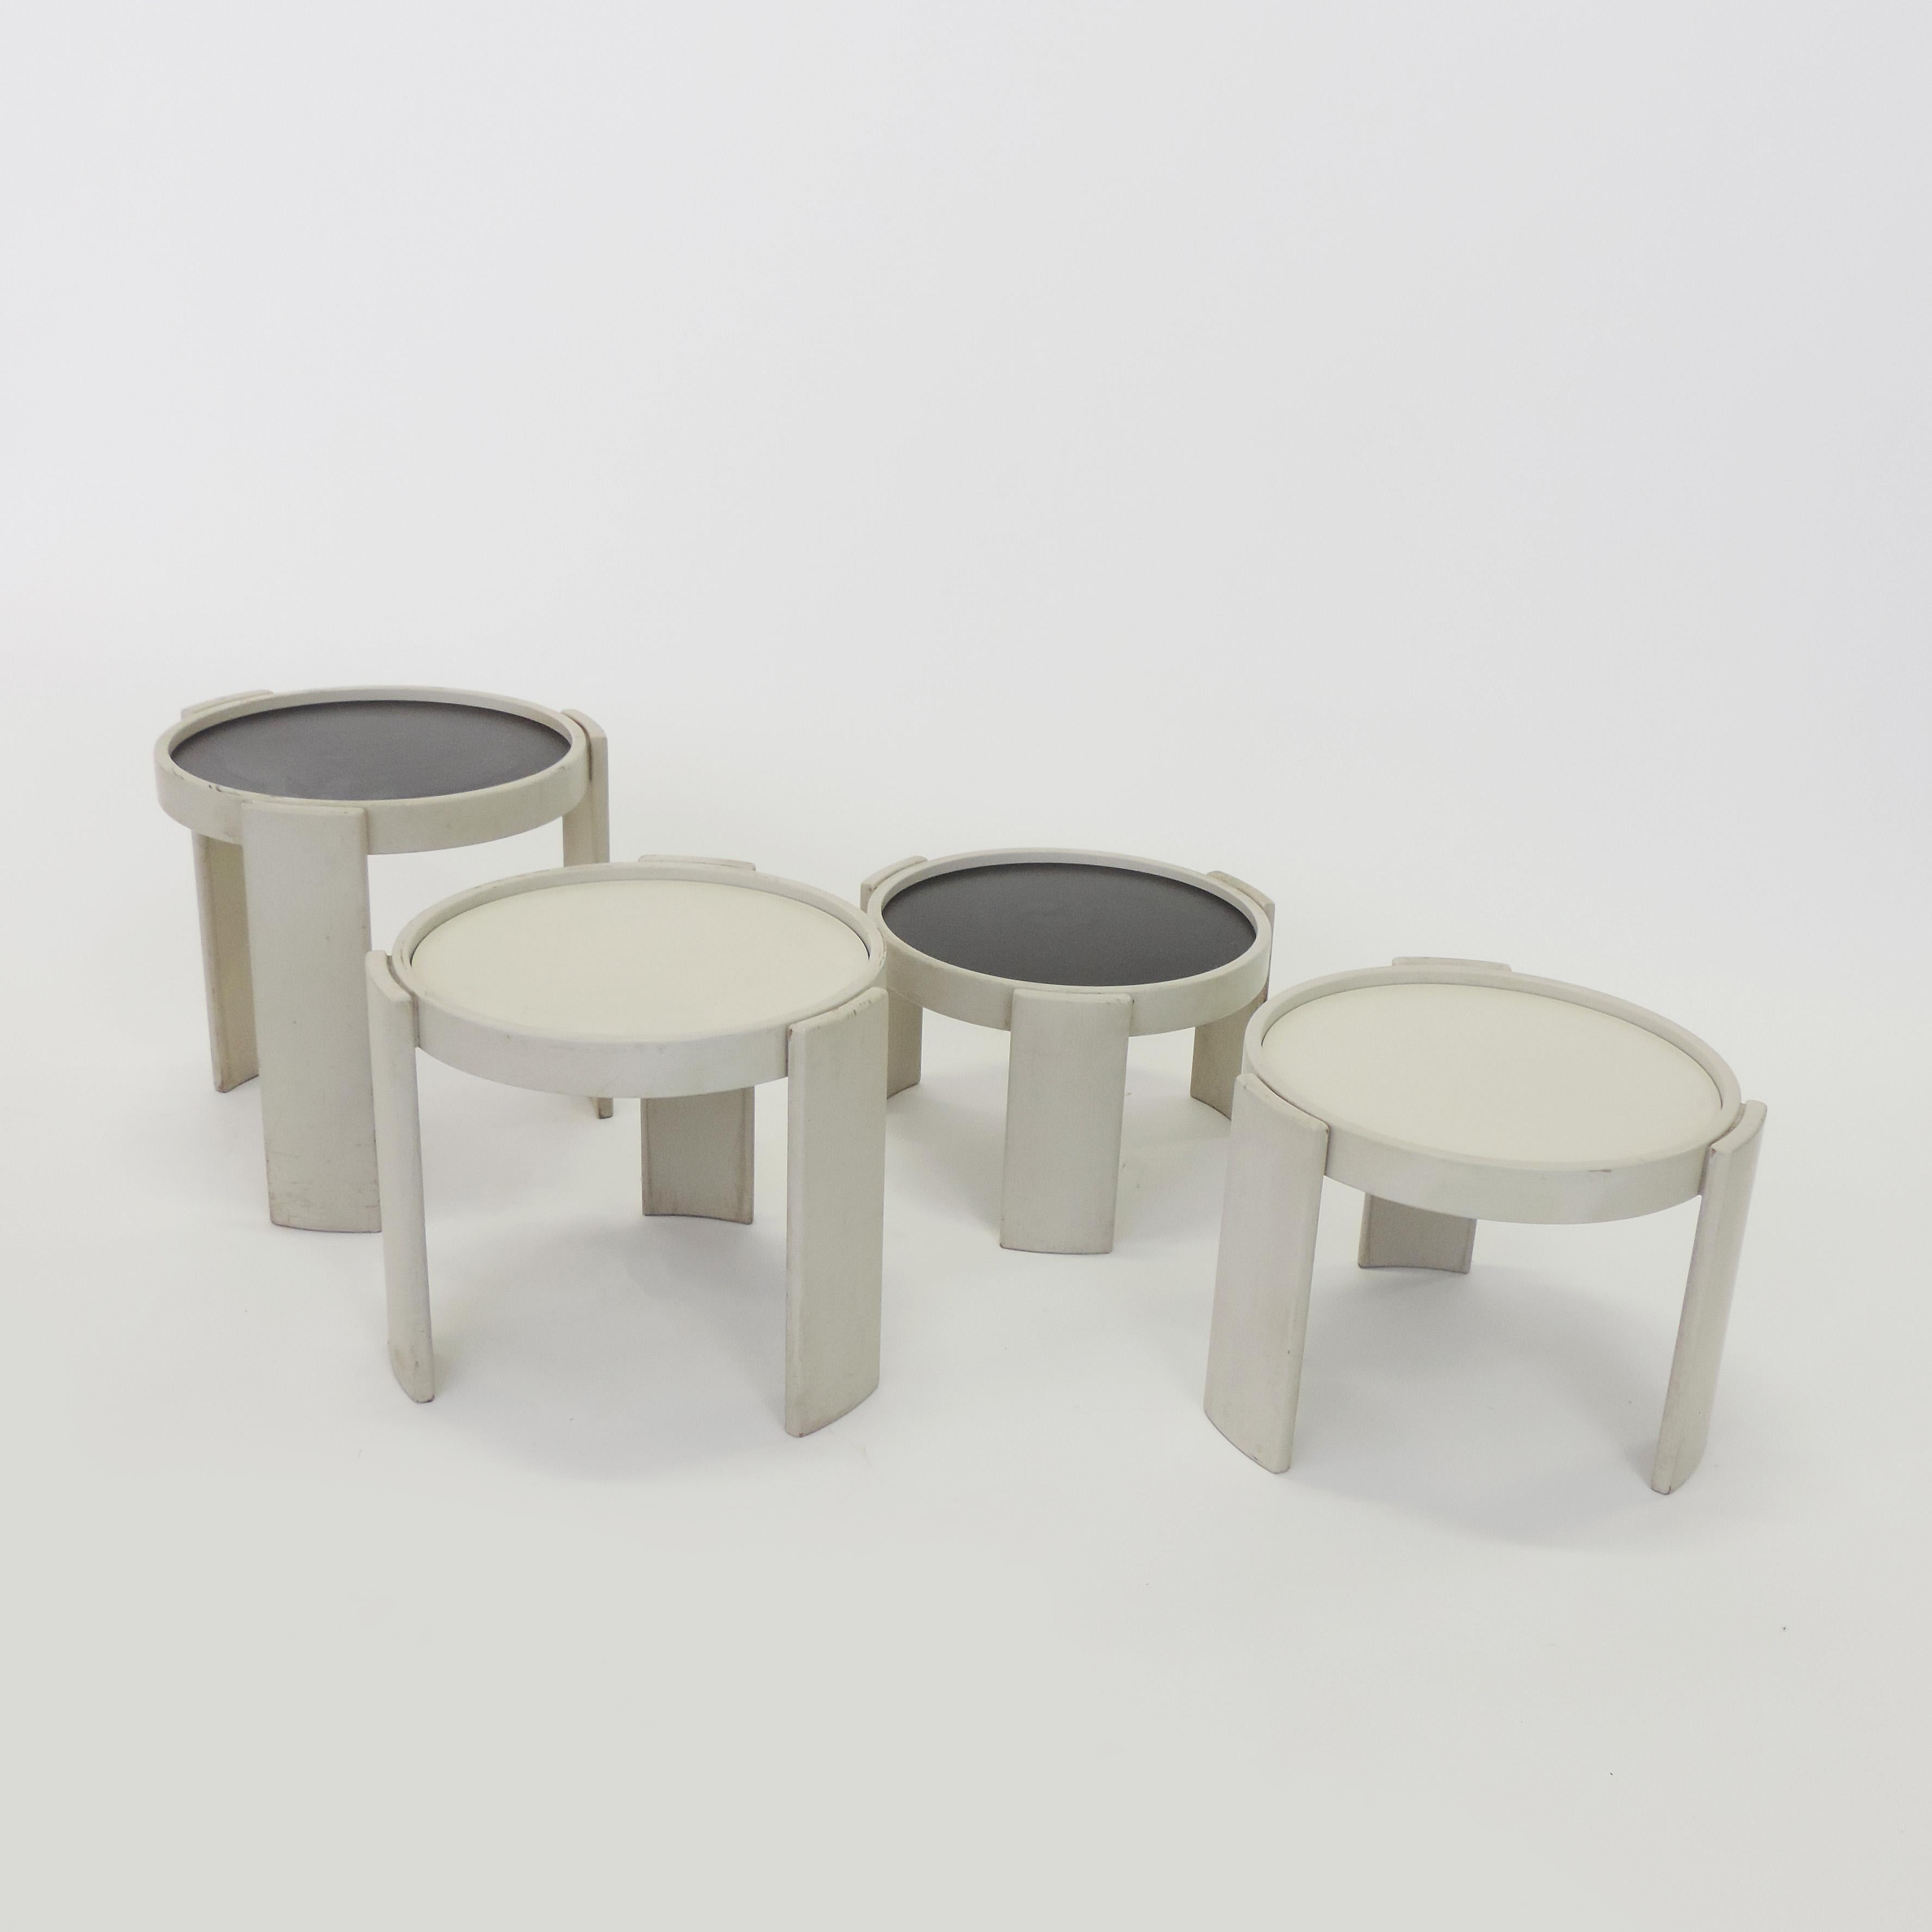 Gianfranco Frattini nesting tables in original light grey paint for Cassina, Italy, 1966.
Nesting tables with black and white interchangeable tops.
  